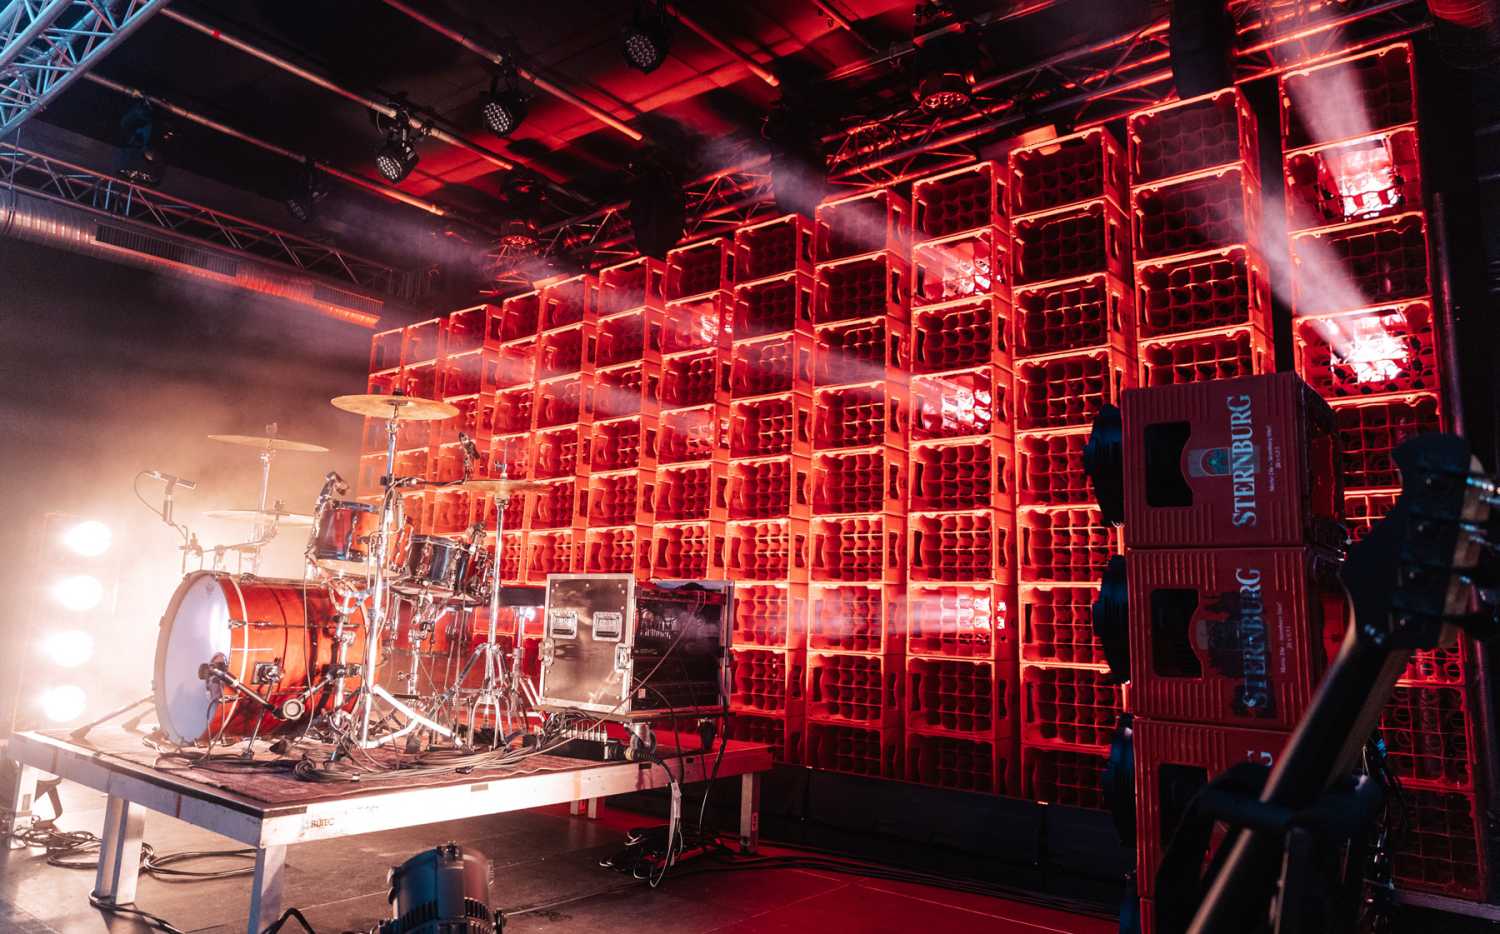 The beer crate wall is the centrepiece of a stage design (photo: Sascha Göttsche)